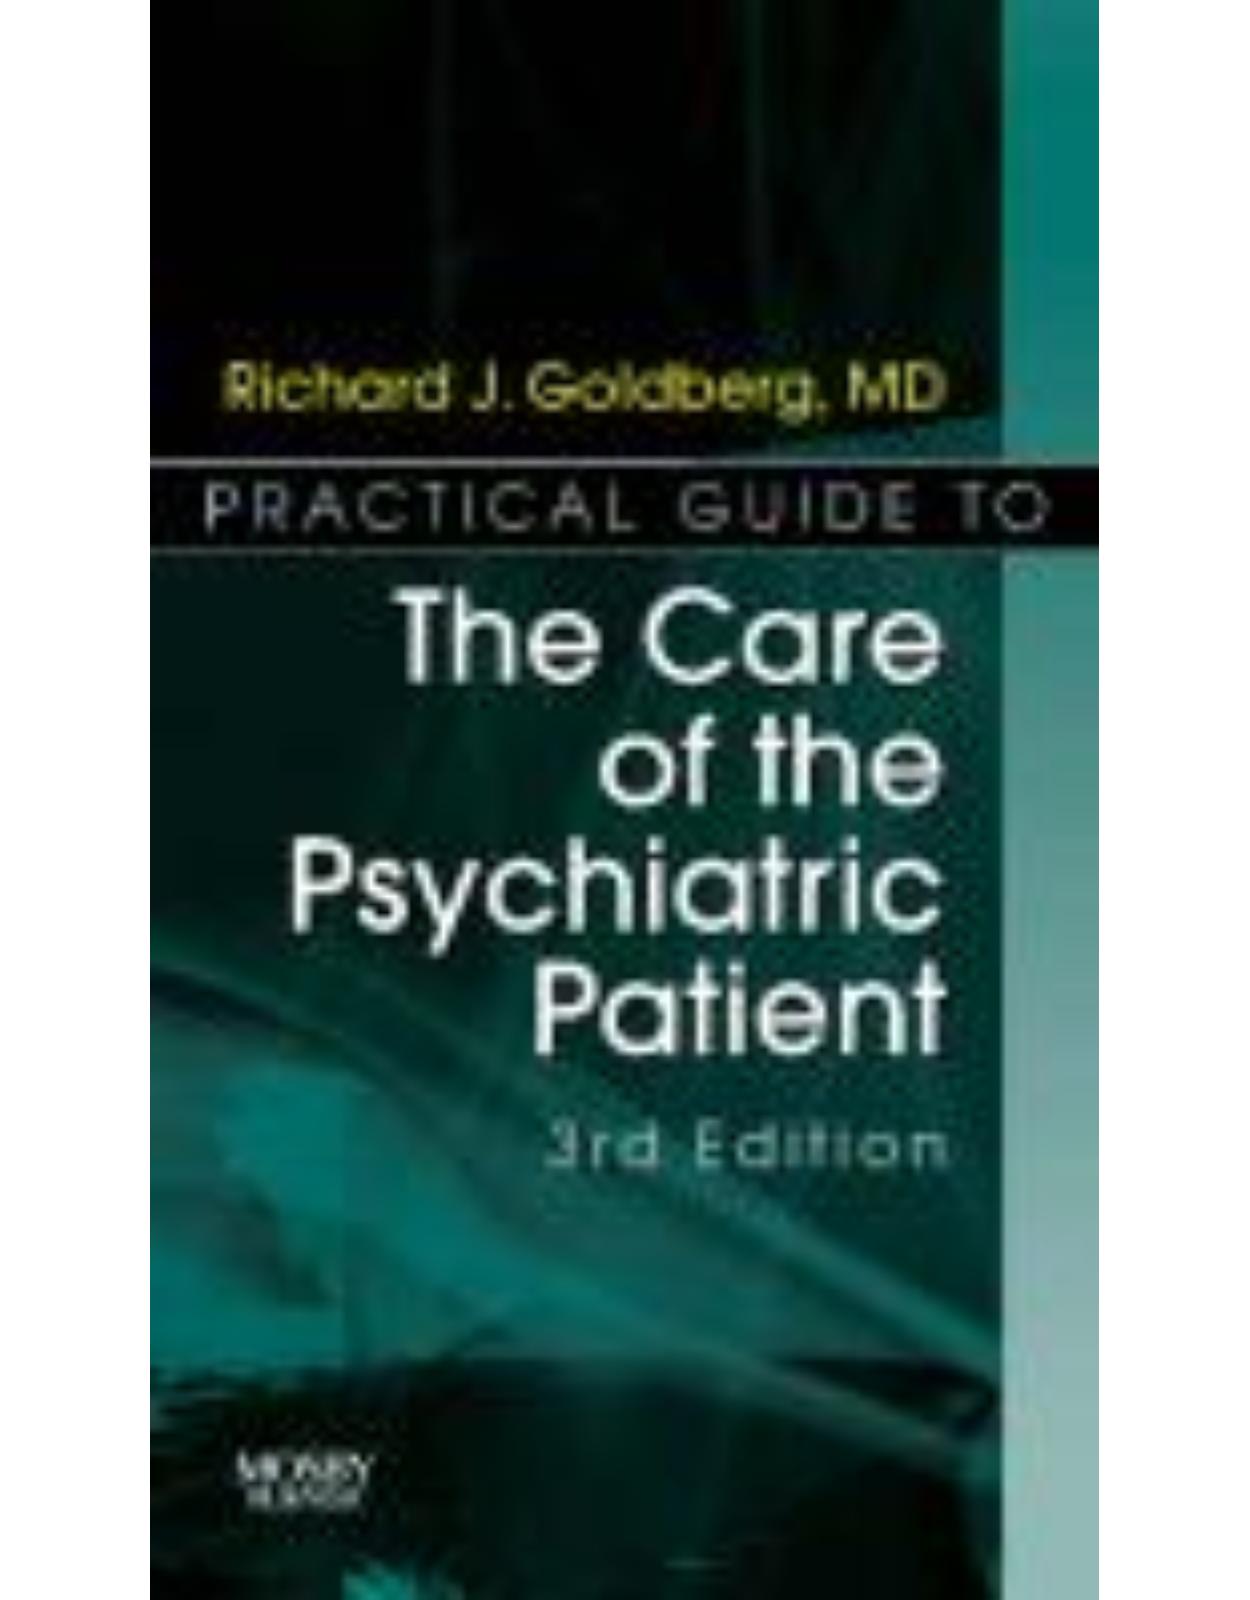 Practical Guide to the Care of the Psychiatric Patient, Practical Guide Series, 3rd Edition